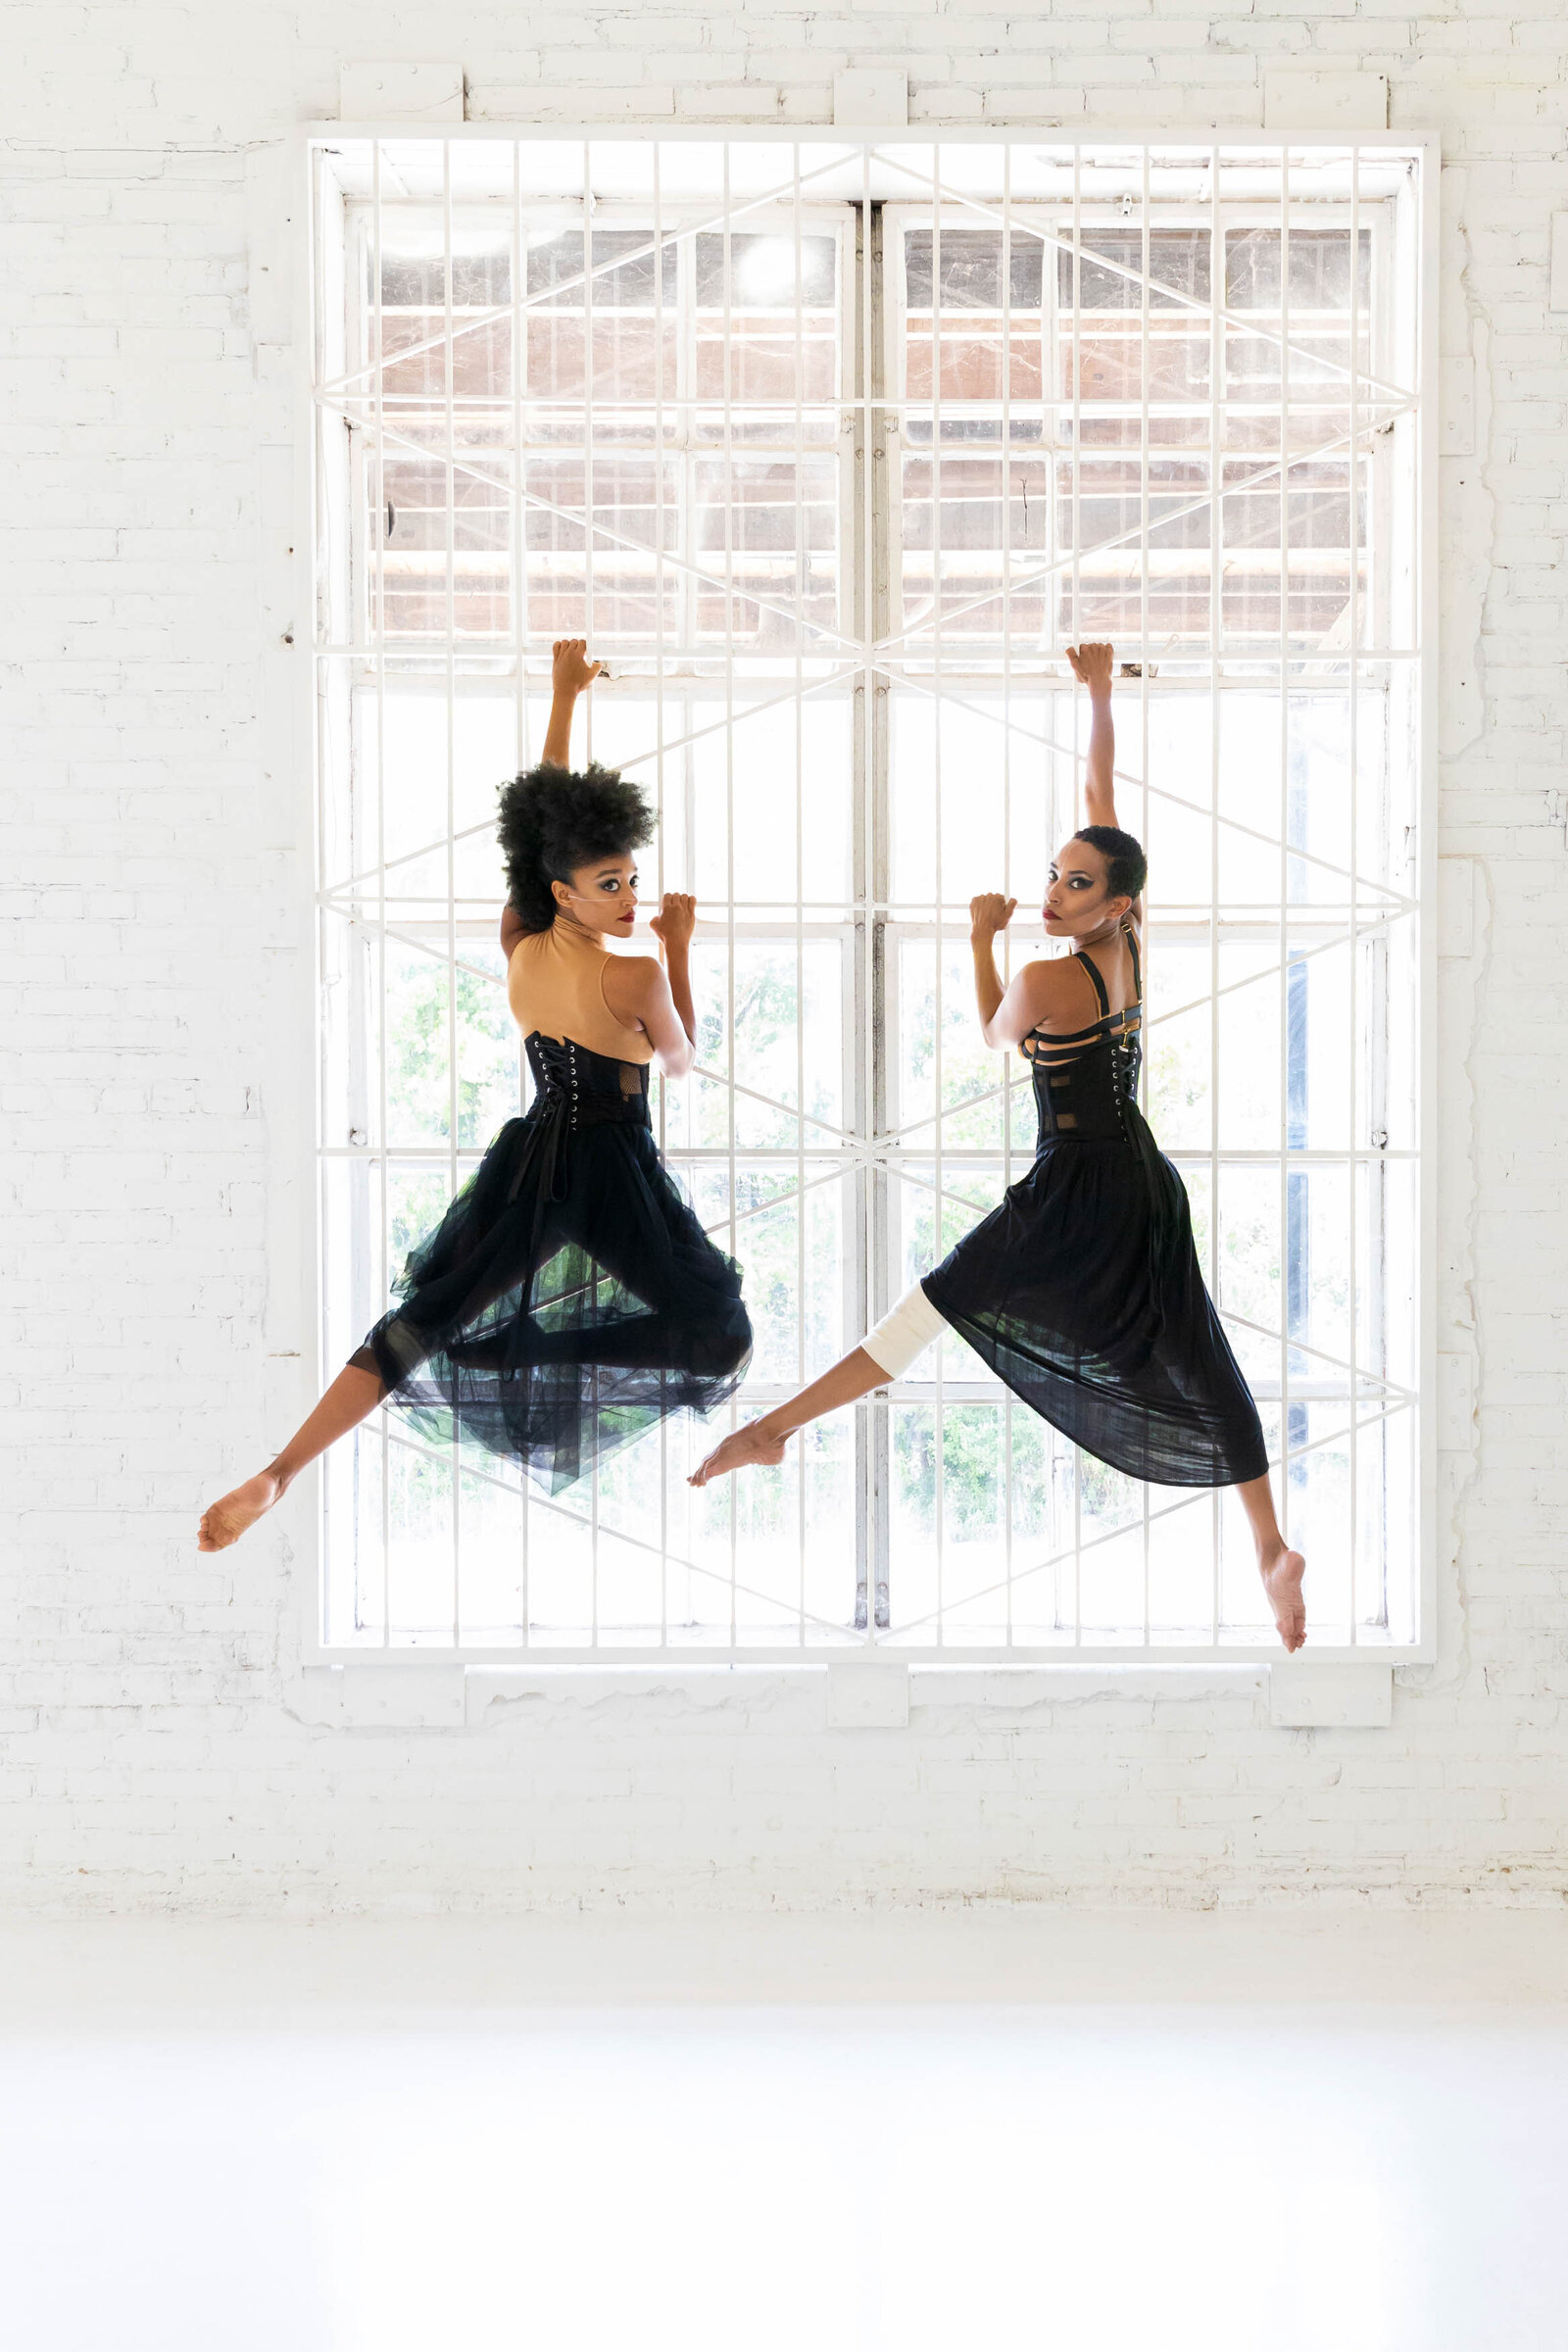 two black women dancers in sheer skirts and bustiers hanging on to window